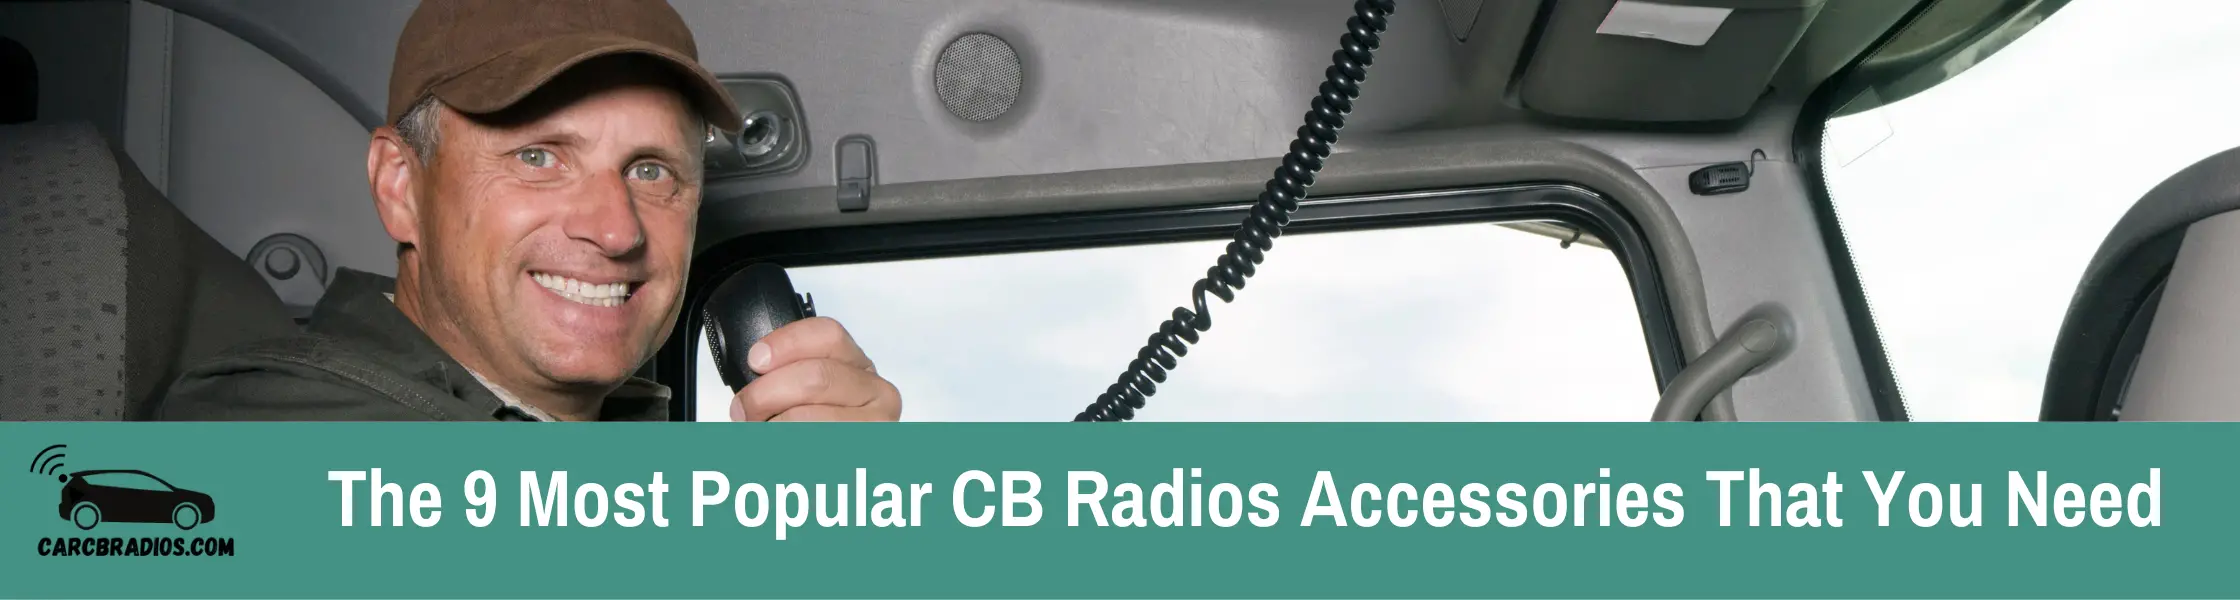 The 9 Most Popular CB Radios Accessories That You Need - The fill list of items that you would need to purchase